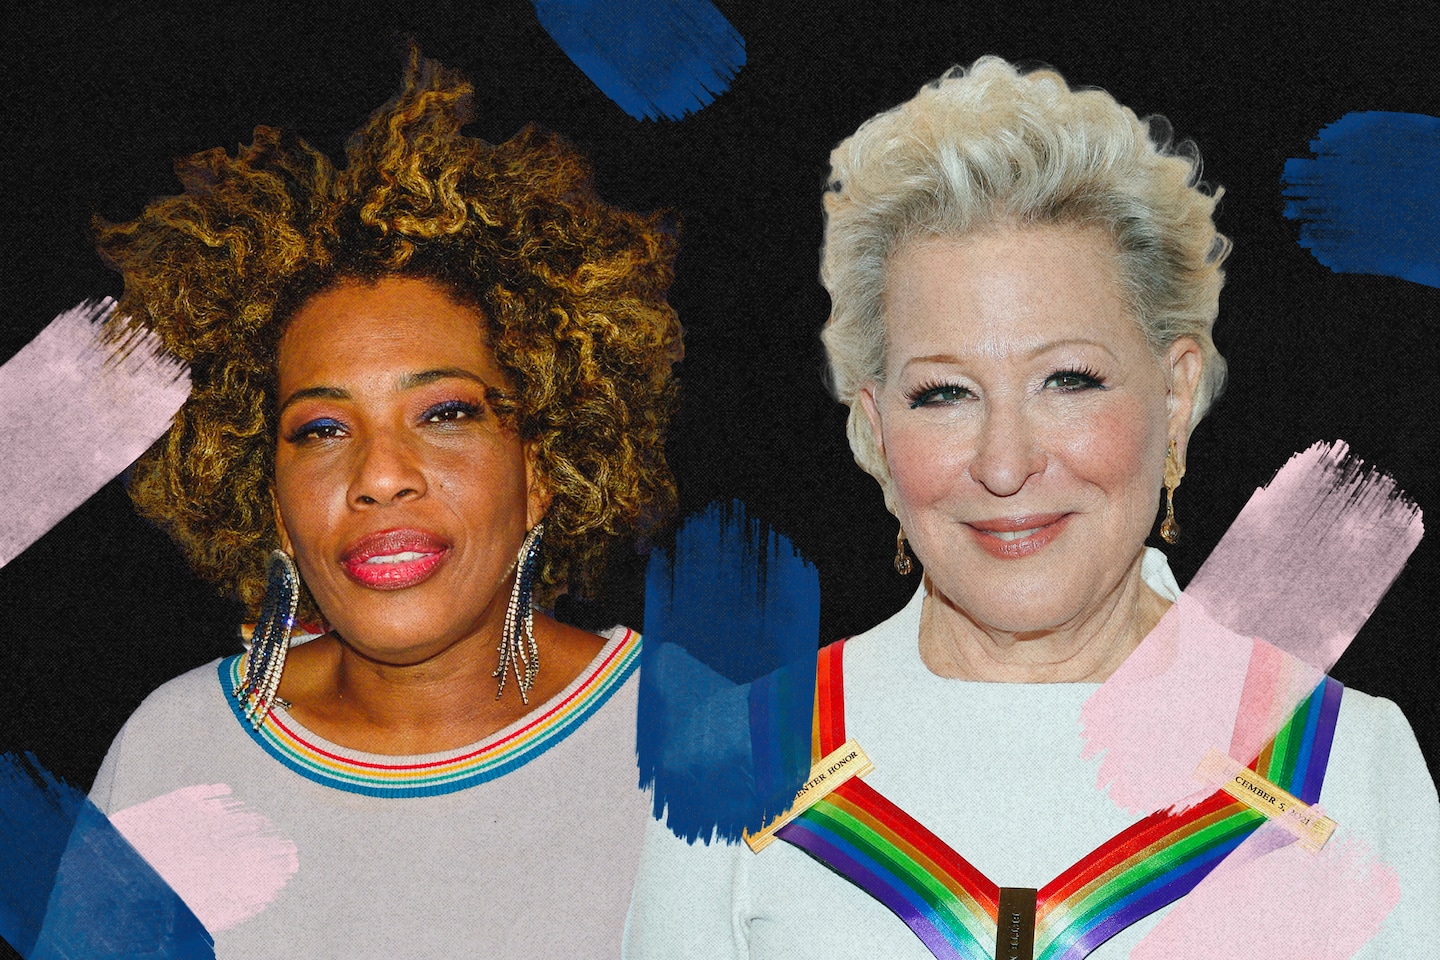 You are currently viewing Bette Midler, Macy Gray and why transgender advocates are upset